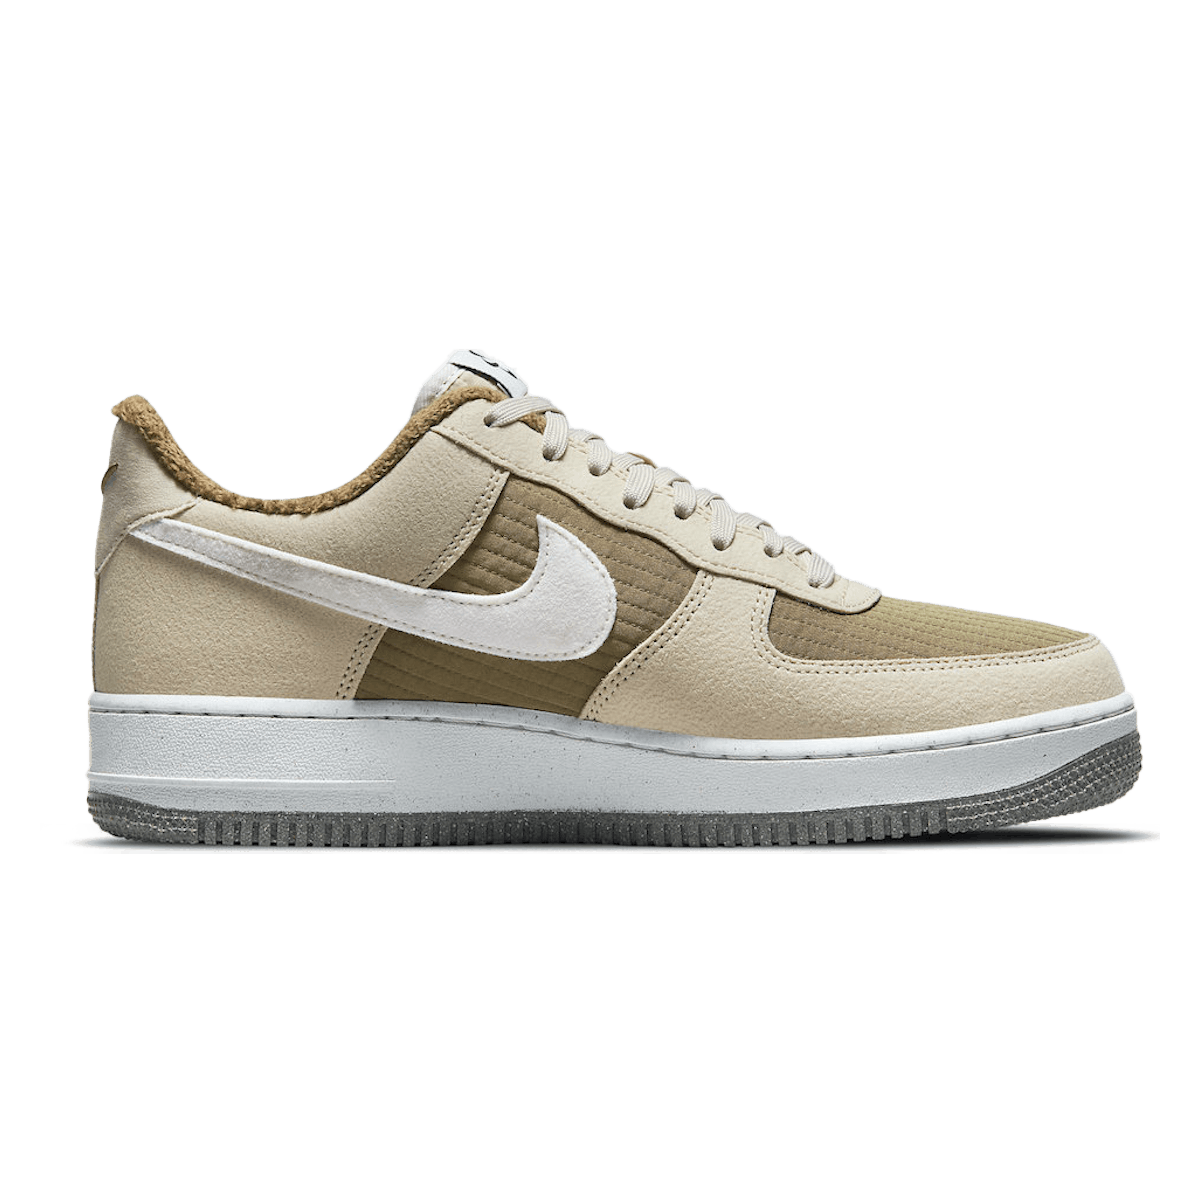 Nike Air Force 1 '07 LV8 “Toasty”